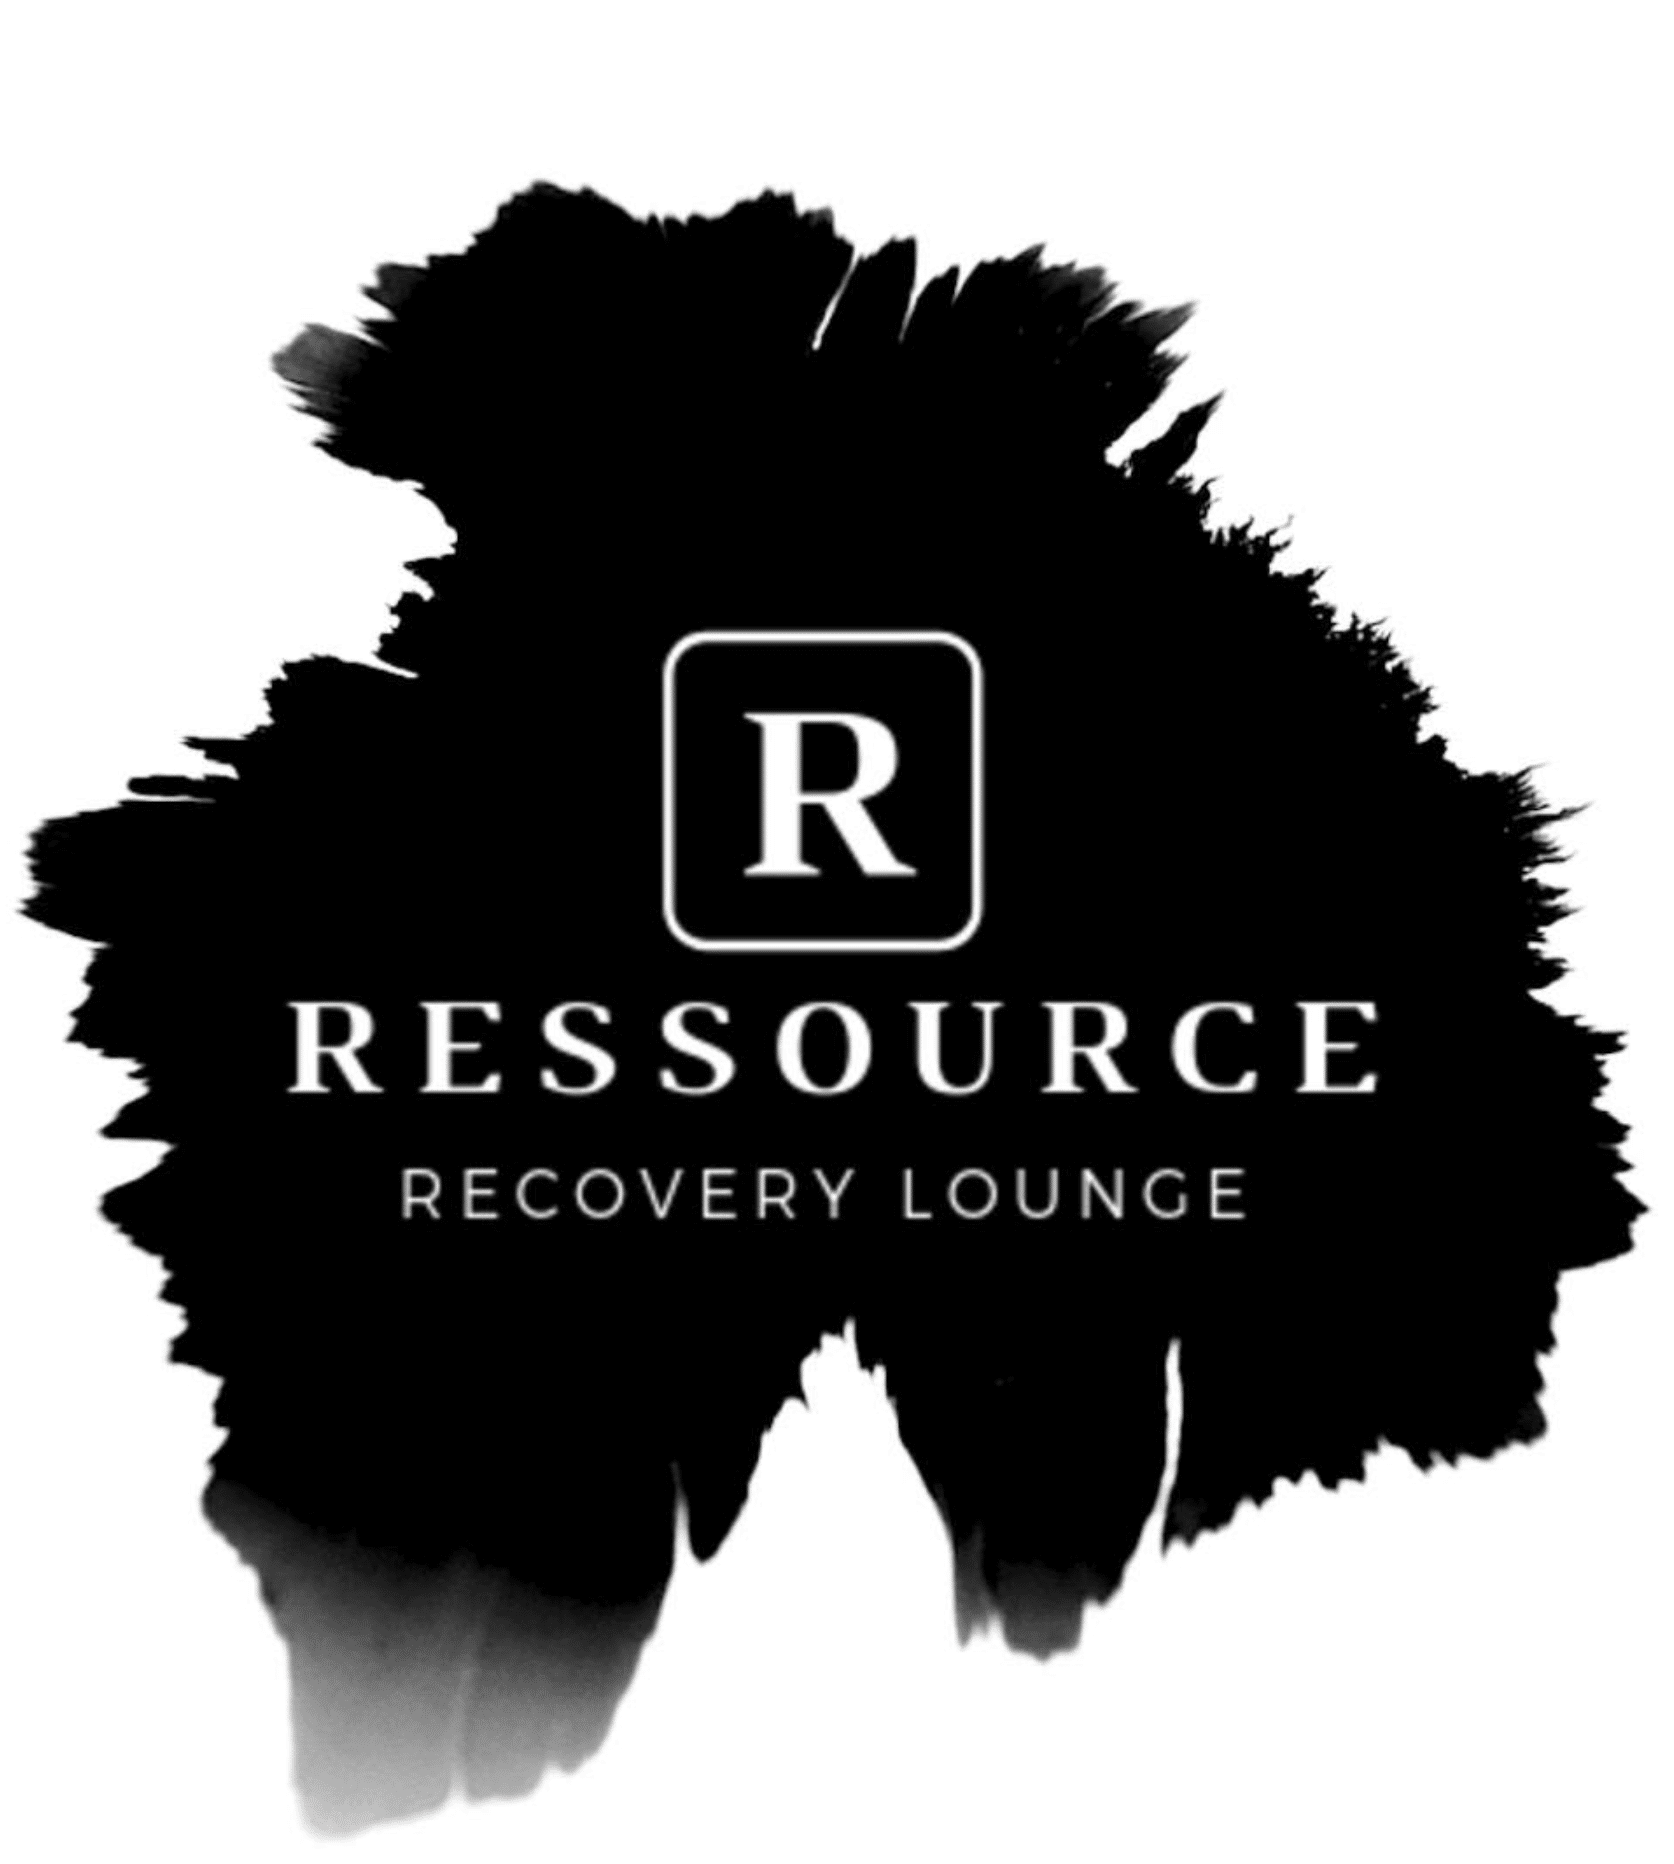 Ressource Recovery Lounge